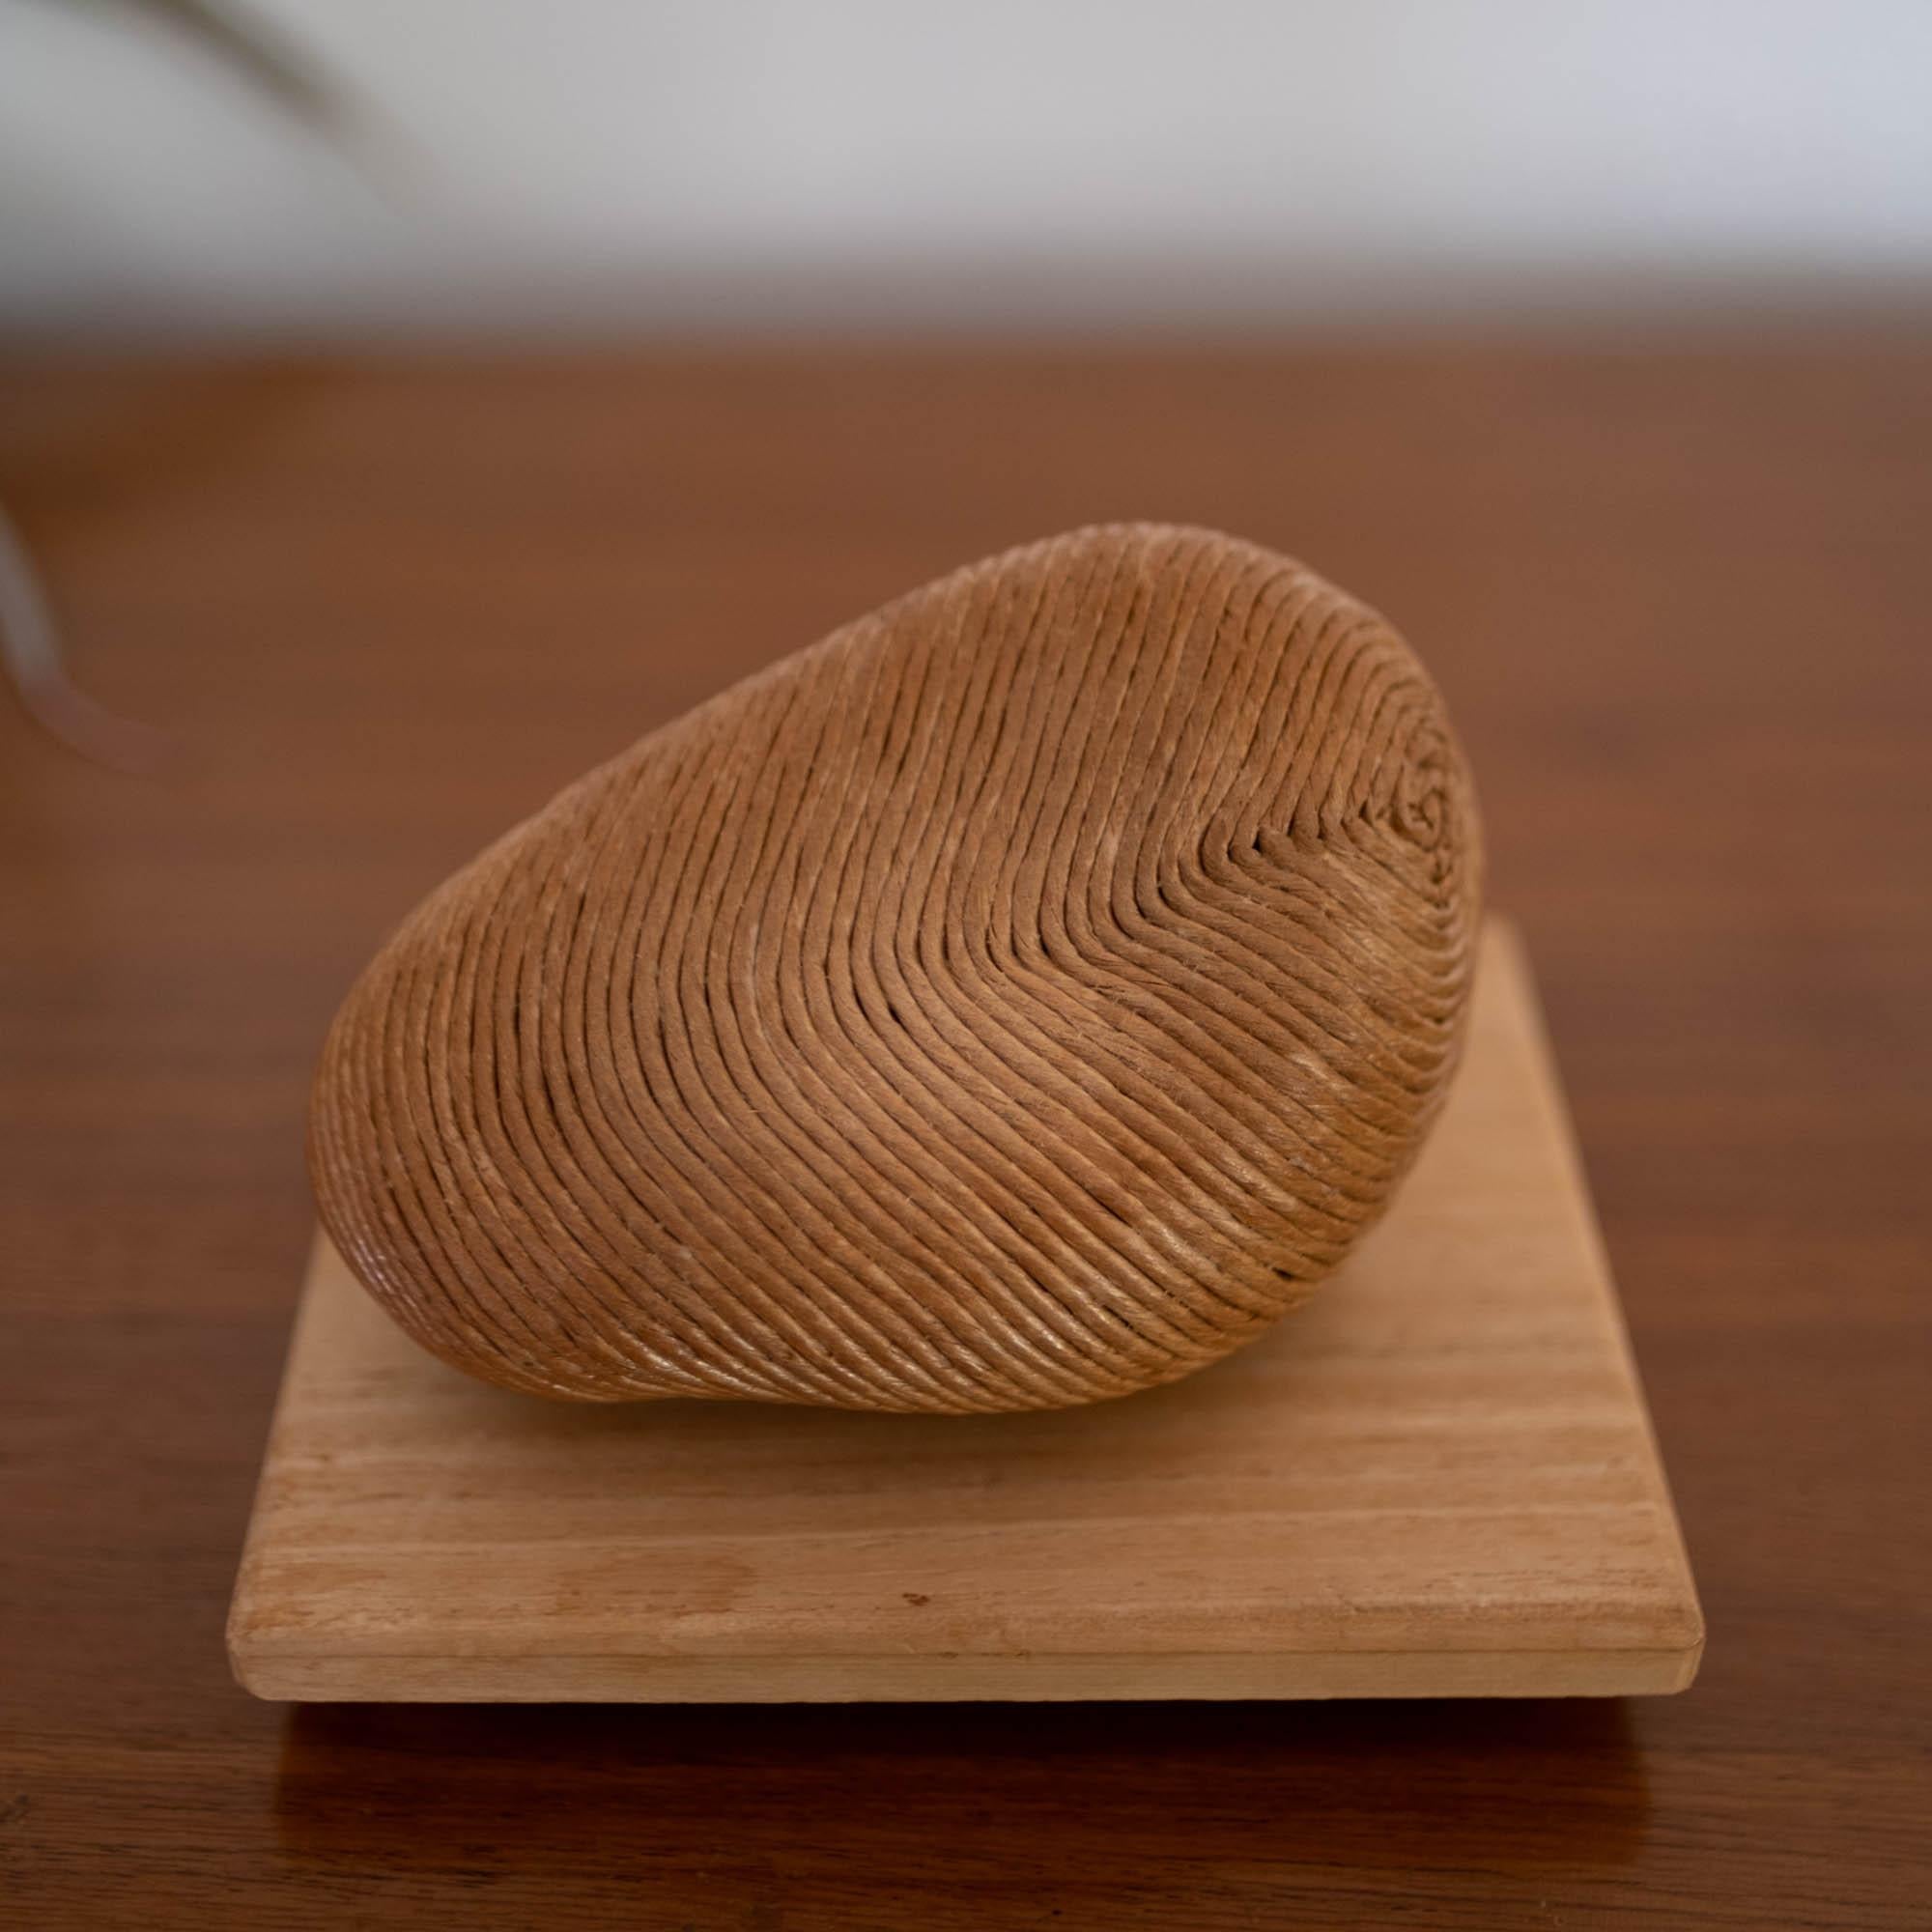 Handcrafted Japanese art rock in its original presentation box. A beautifully made simple form. From the La Jolla estate of Mid-Century Modernist landscape architect Joseph Yamada.